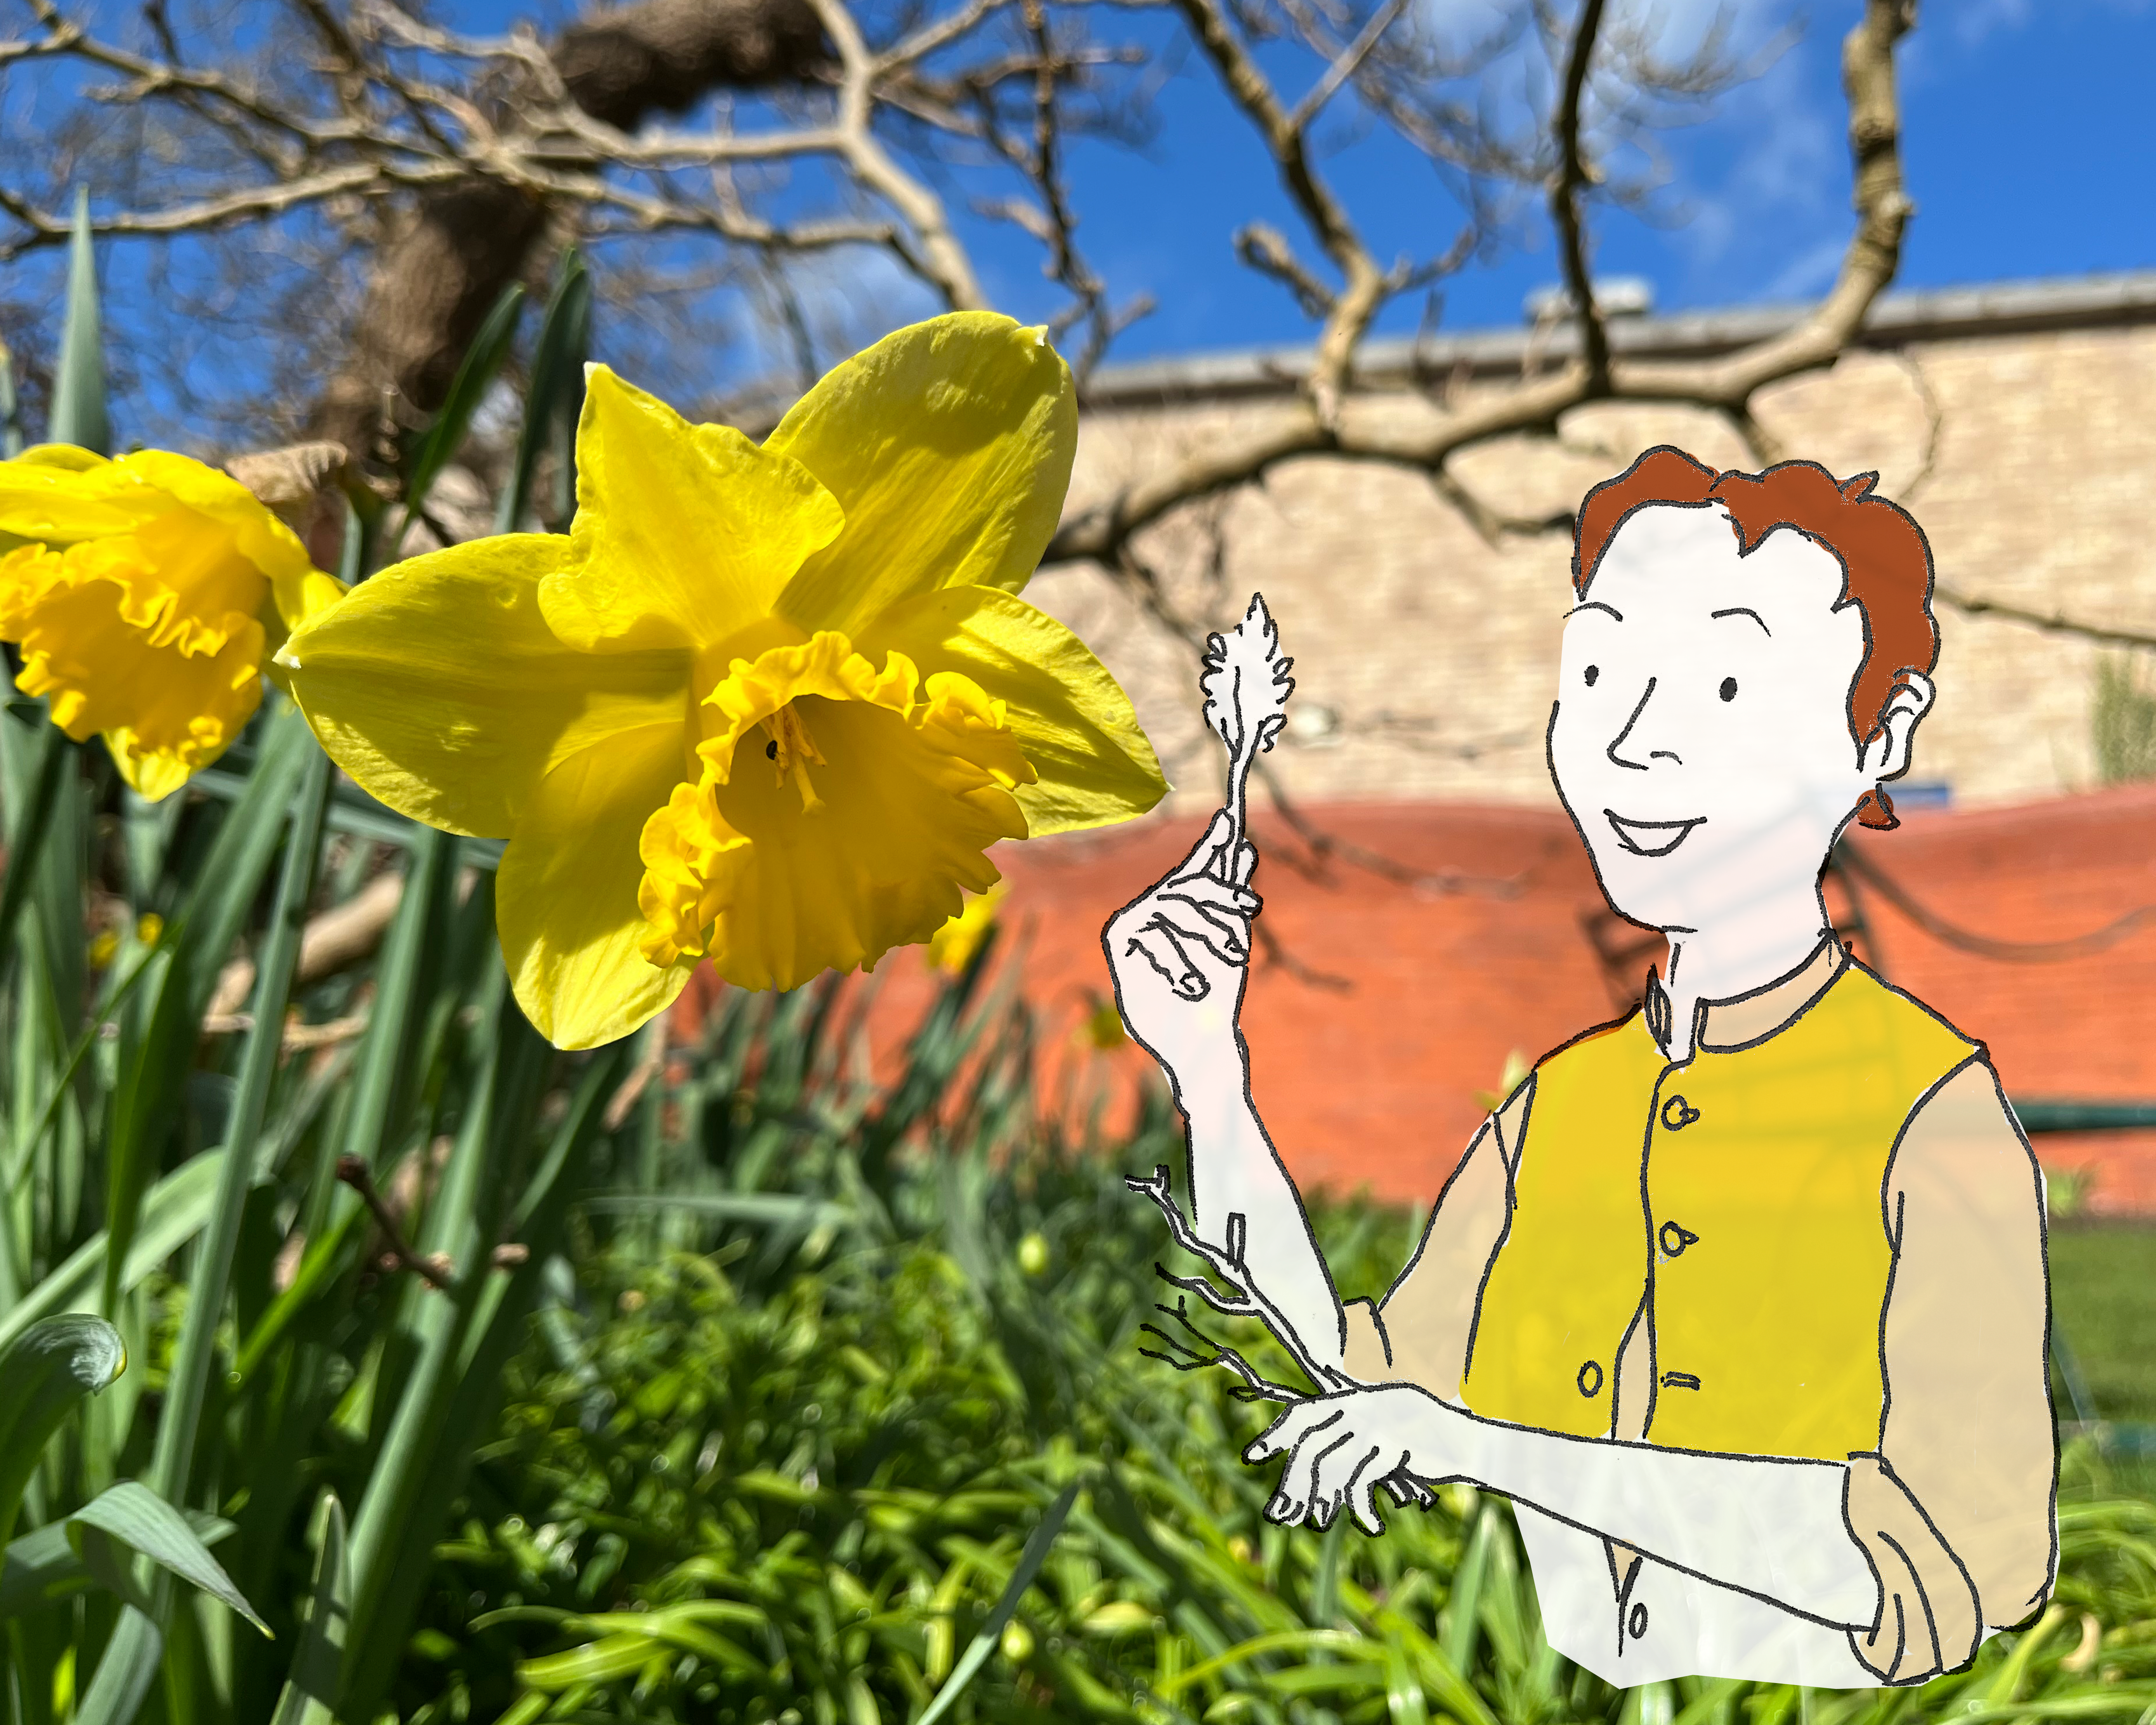 An image taken in the Gainsborough's House garden. It shows a sprouting daffodil with an overlayed character illustration of Thomas Gainsborough.